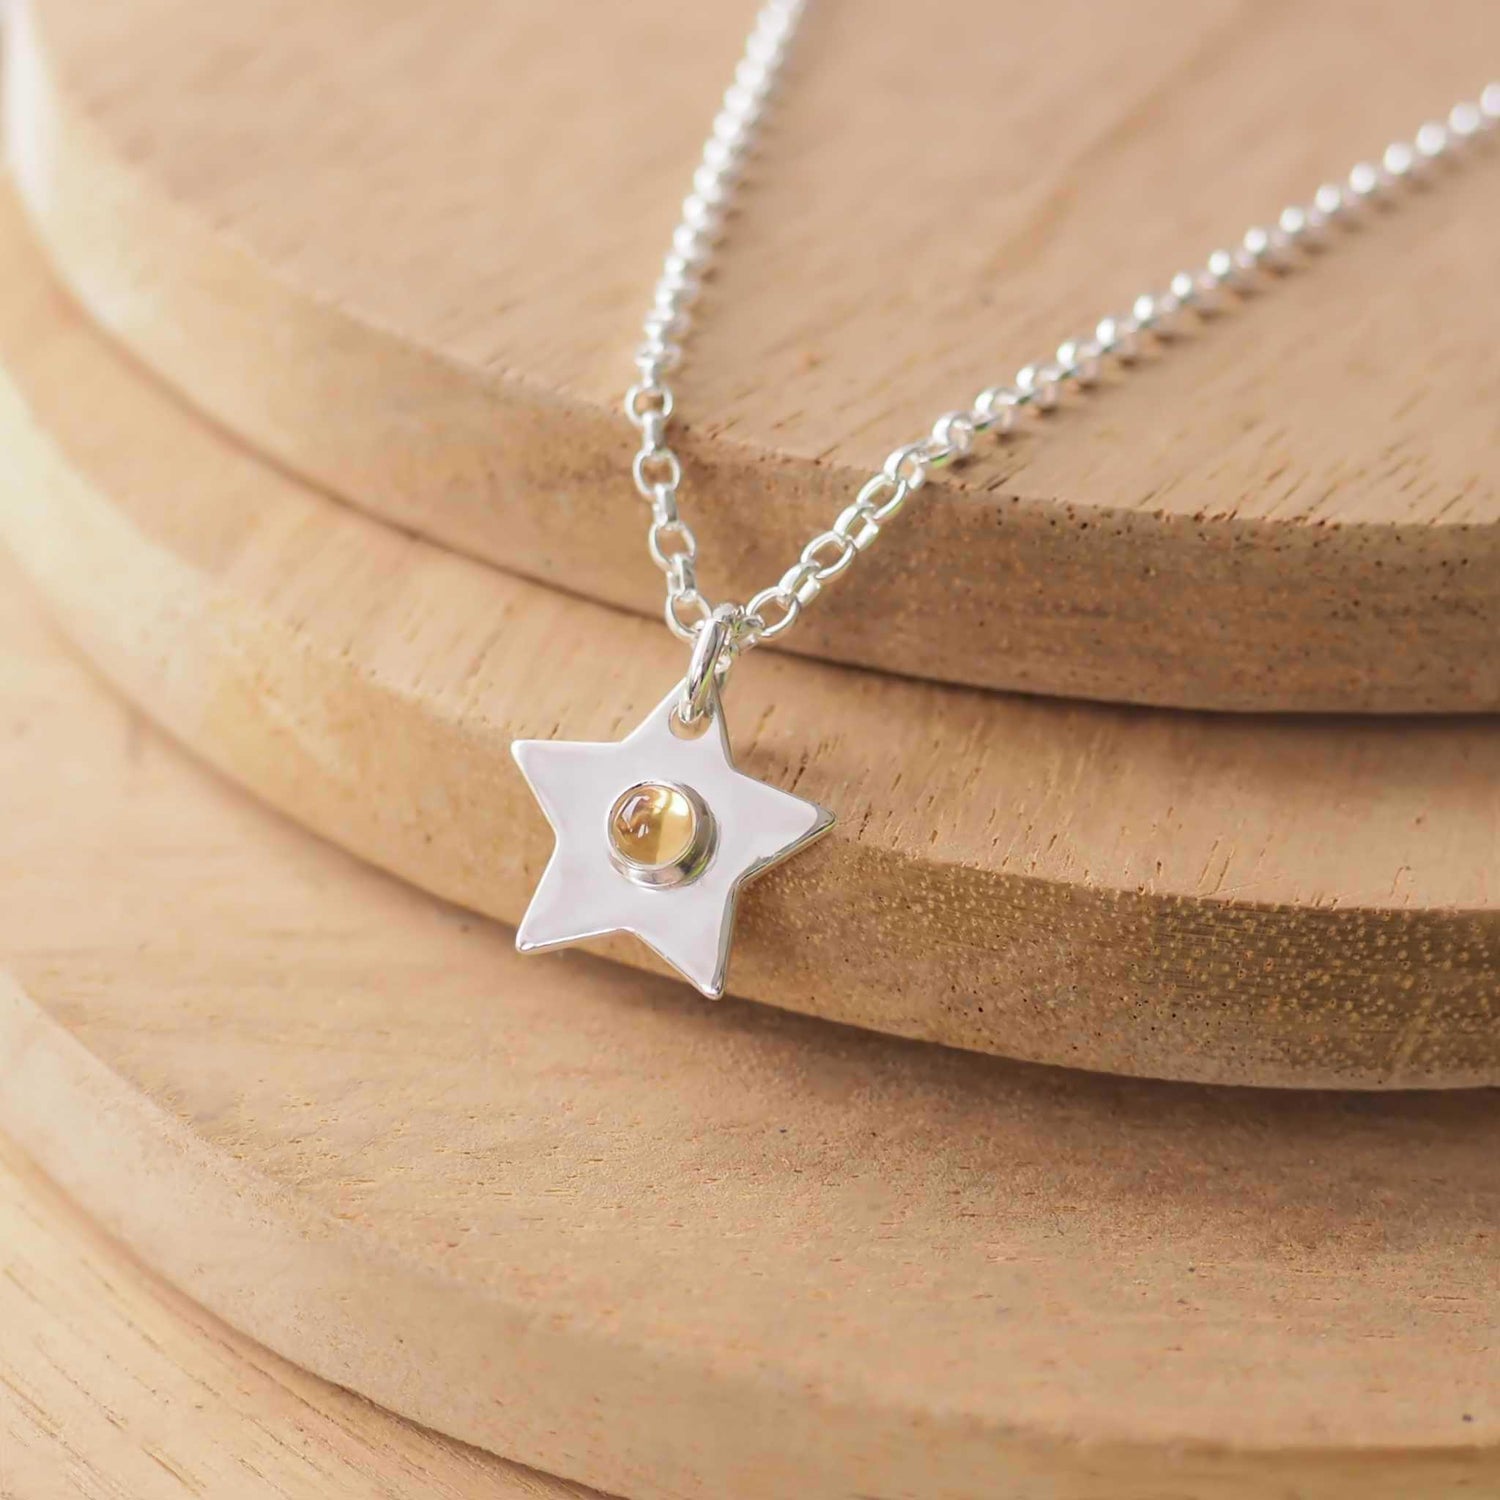 November Birthstone Charm Necklace in the shape of a star with a round 3mm citrine cabochon centre. The star measures 12mm in size so is small enough for children as well as adults and is available in a range of other birthstones too. It is Sterling Silver and comes with a choice of chain design and length. Handmade in Scotland by Maram Jewellery